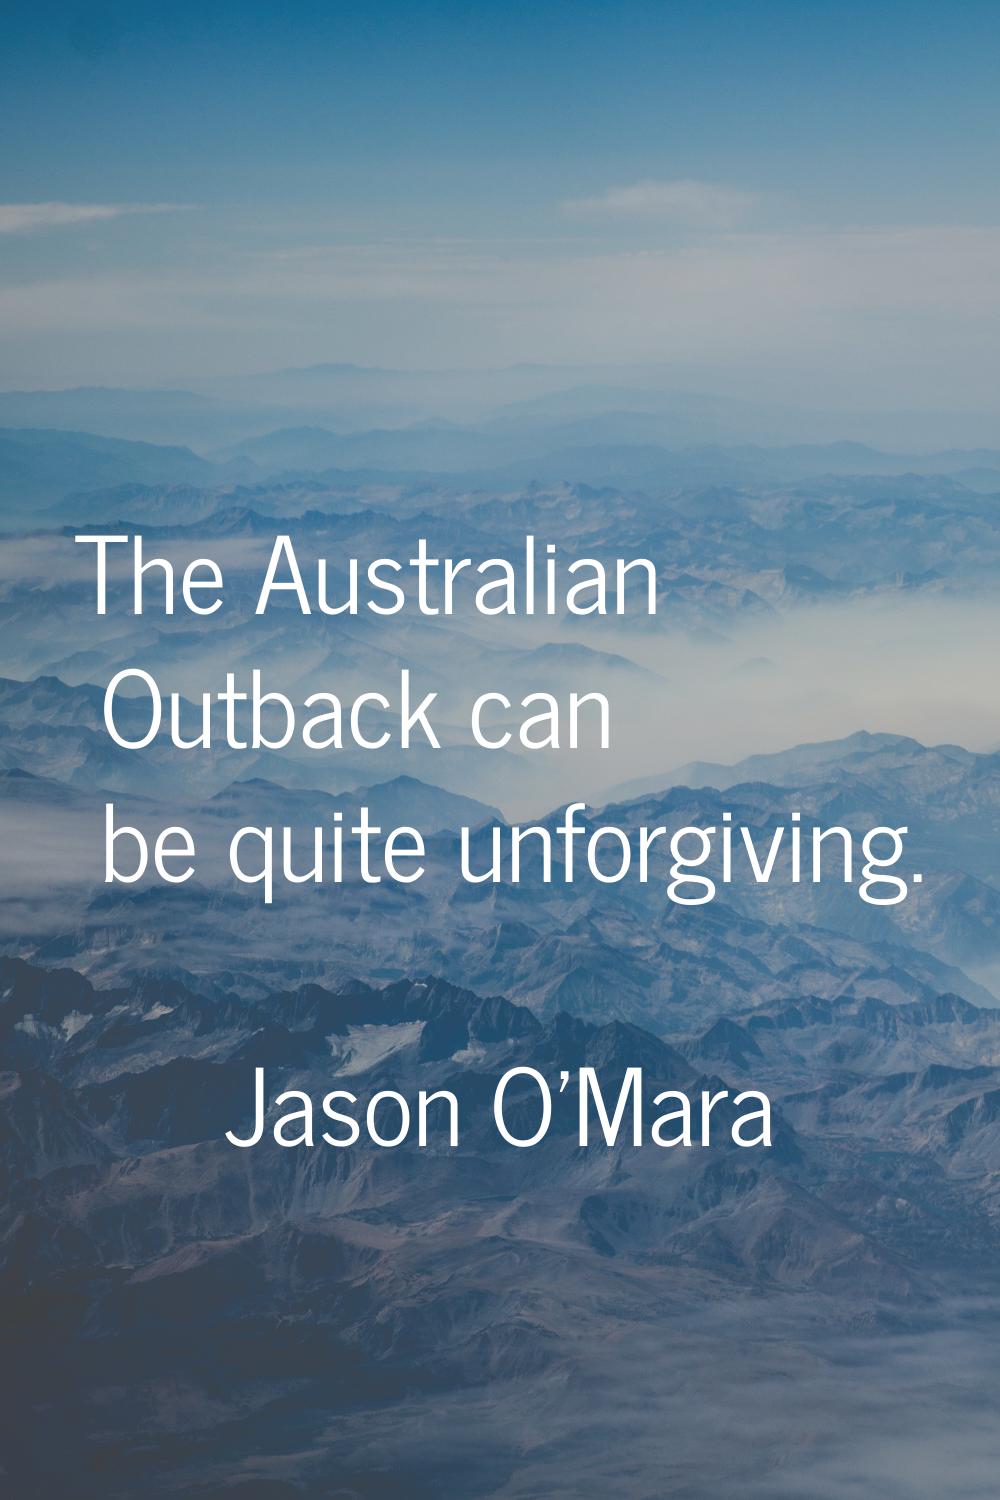 The Australian Outback can be quite unforgiving.